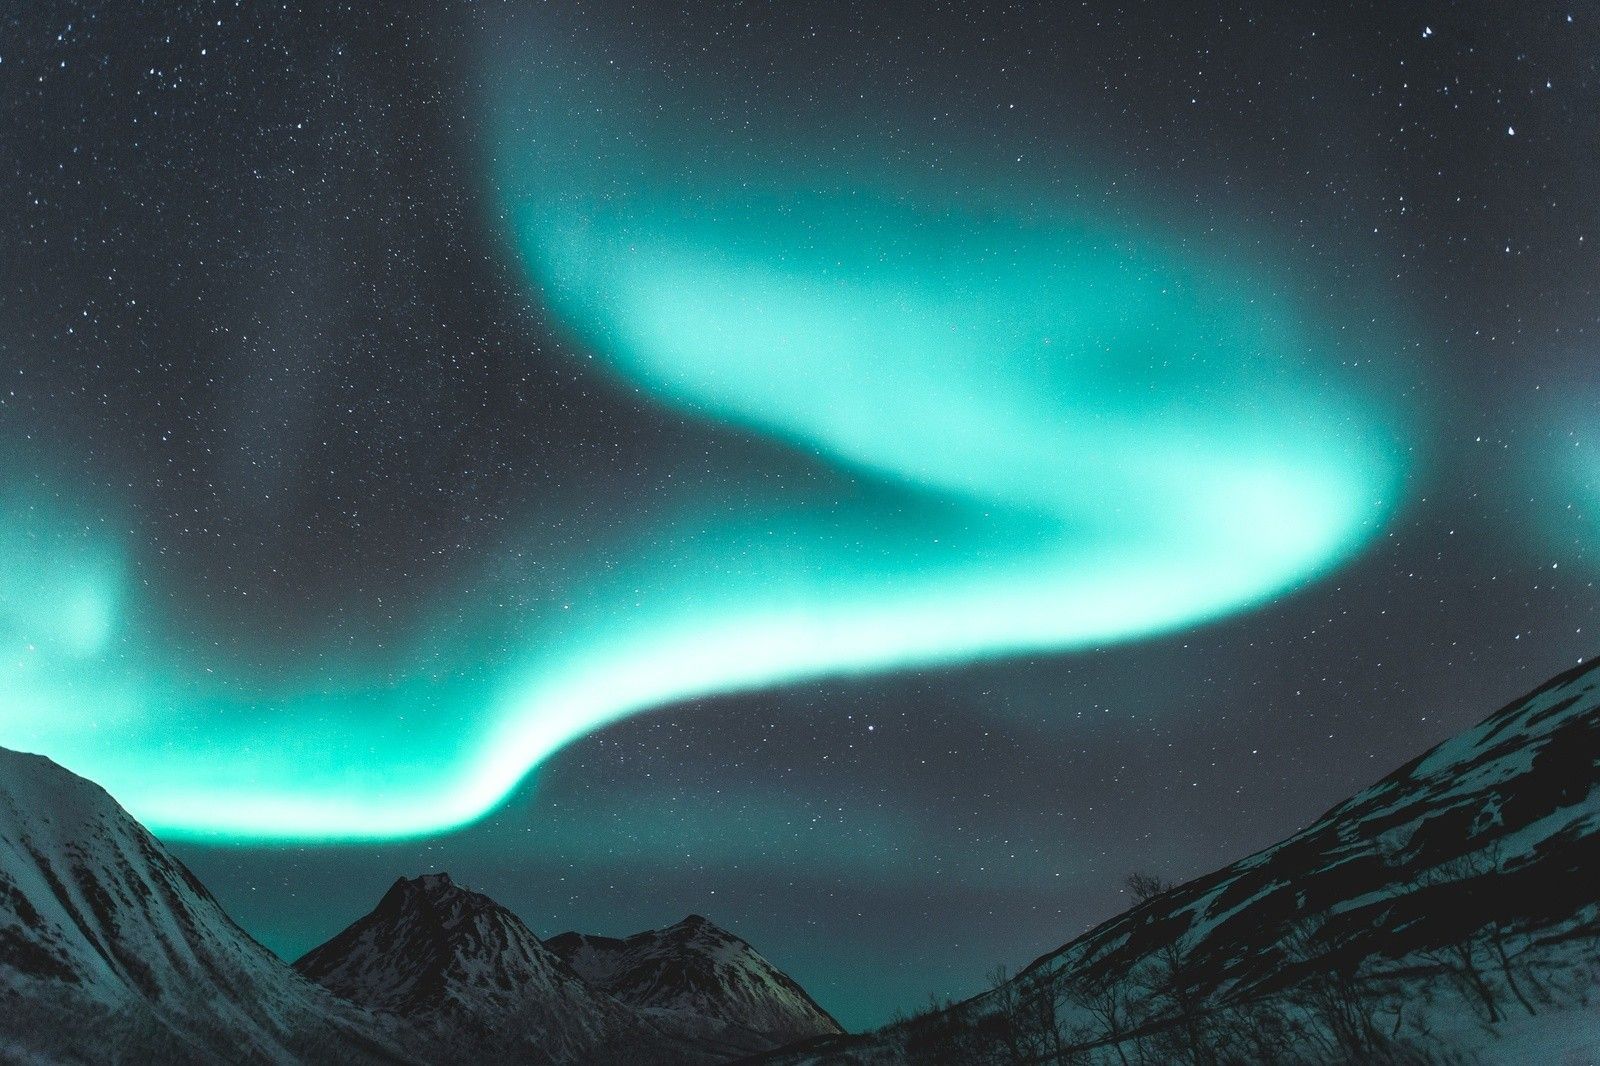 5 Tips for Seeing the Northern Lights in the Norwegian Fjords